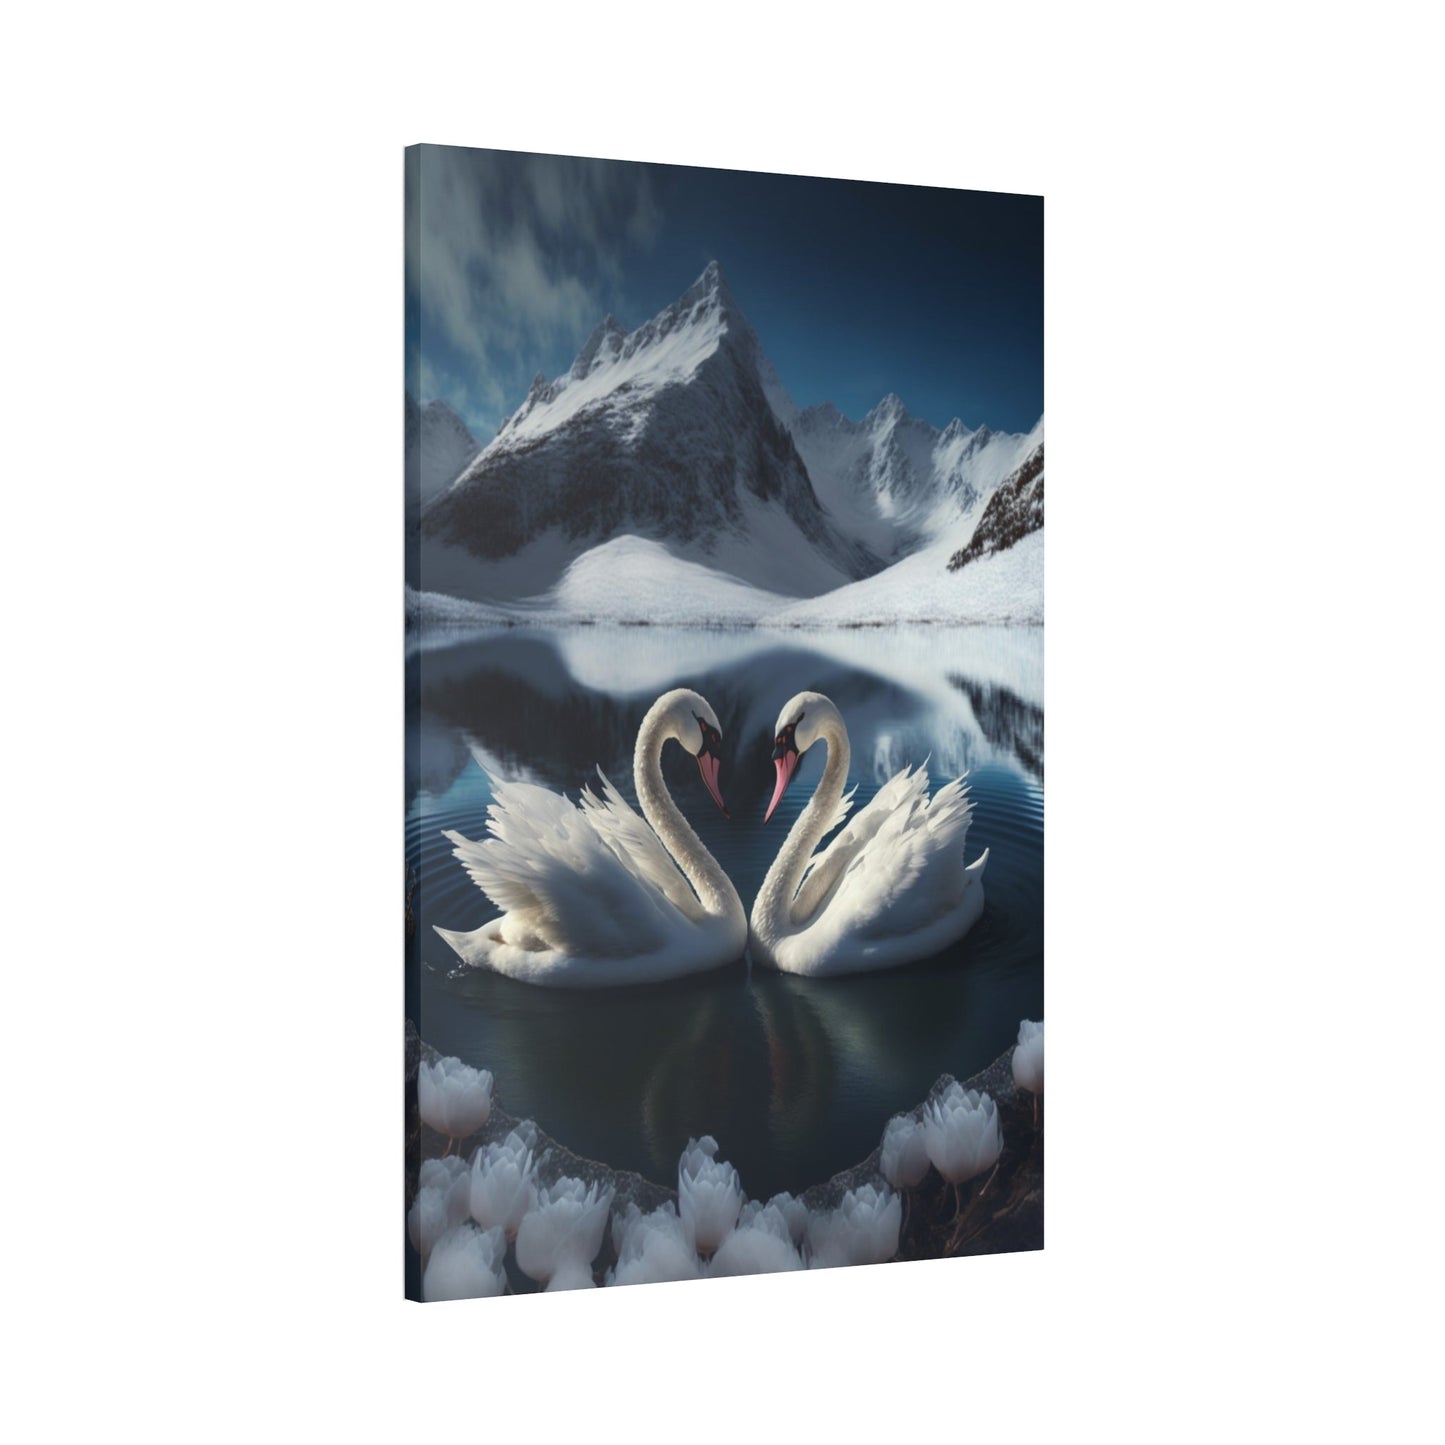 Swan Lake Symphony: Natural Canvas Print of Swans in a Scenic Lake